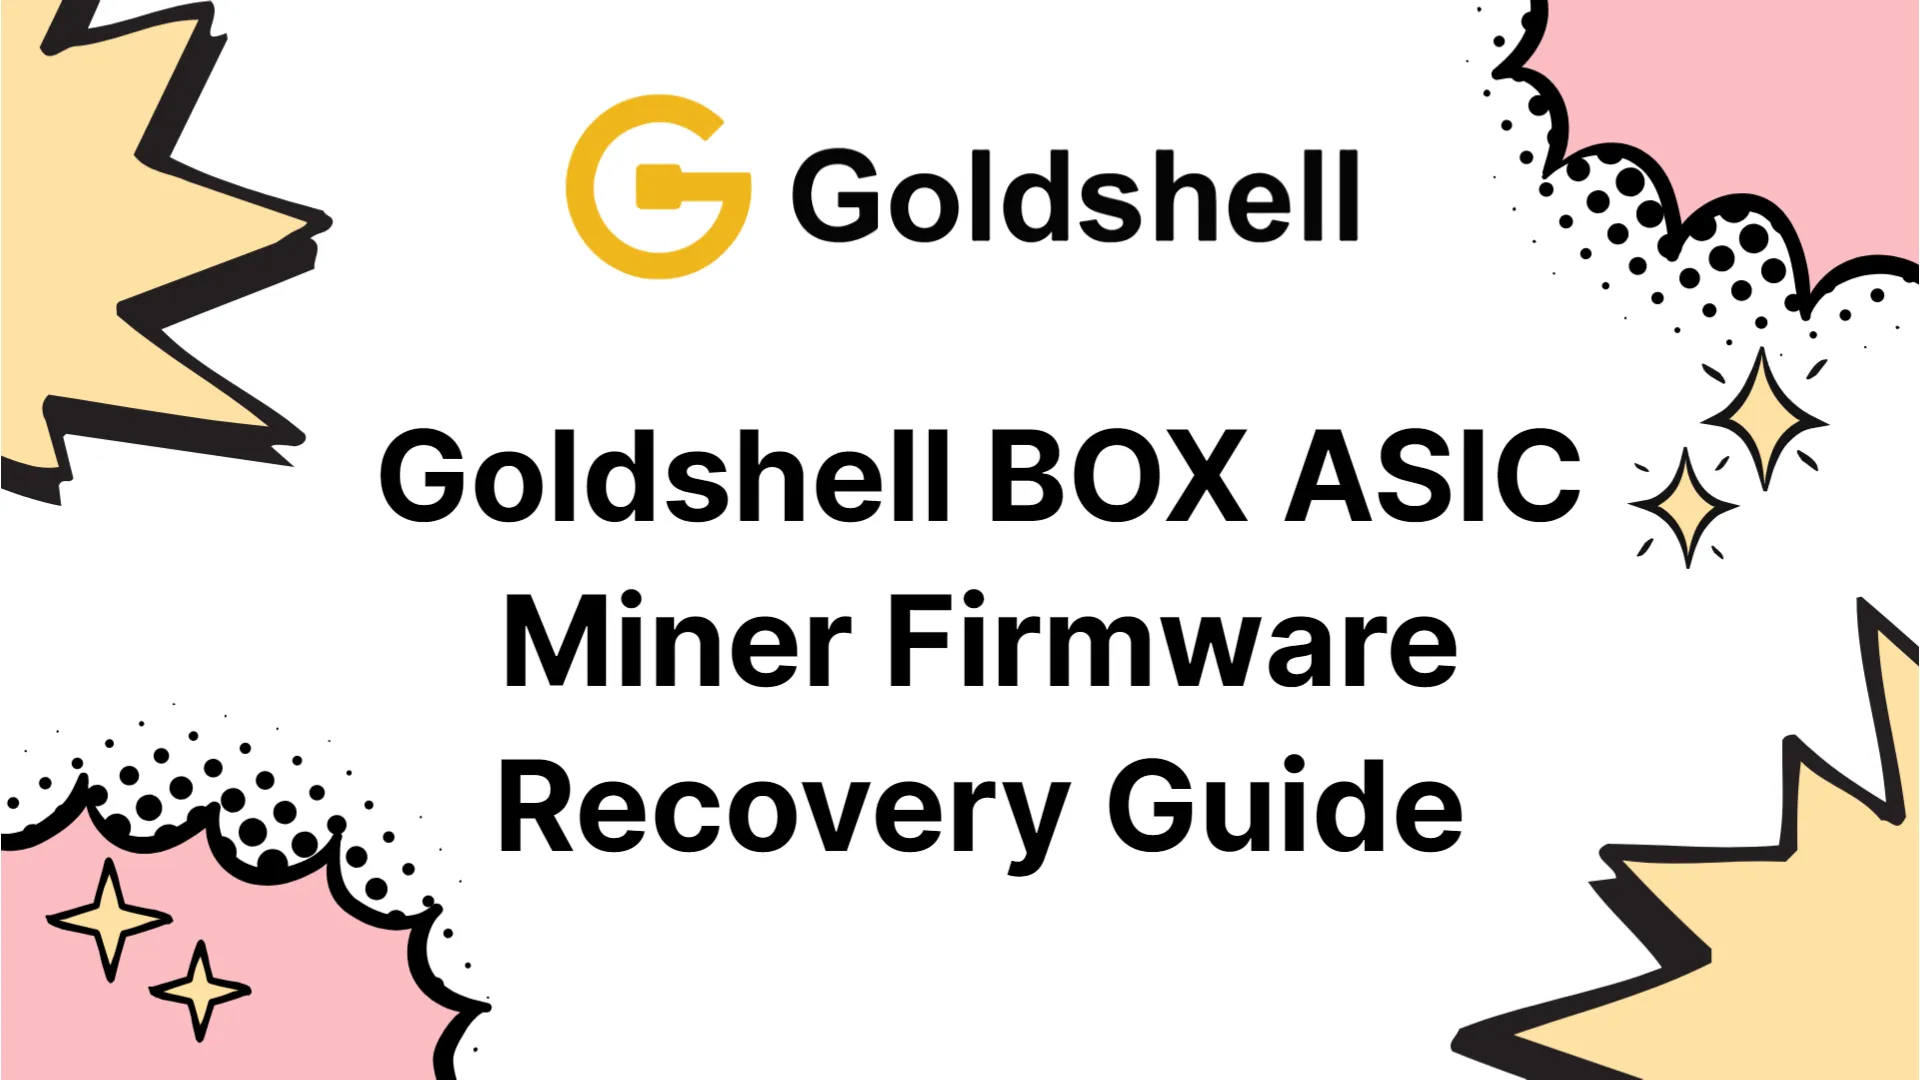 Goldshell BOX ASIC Miner Firmware Recovery Guide